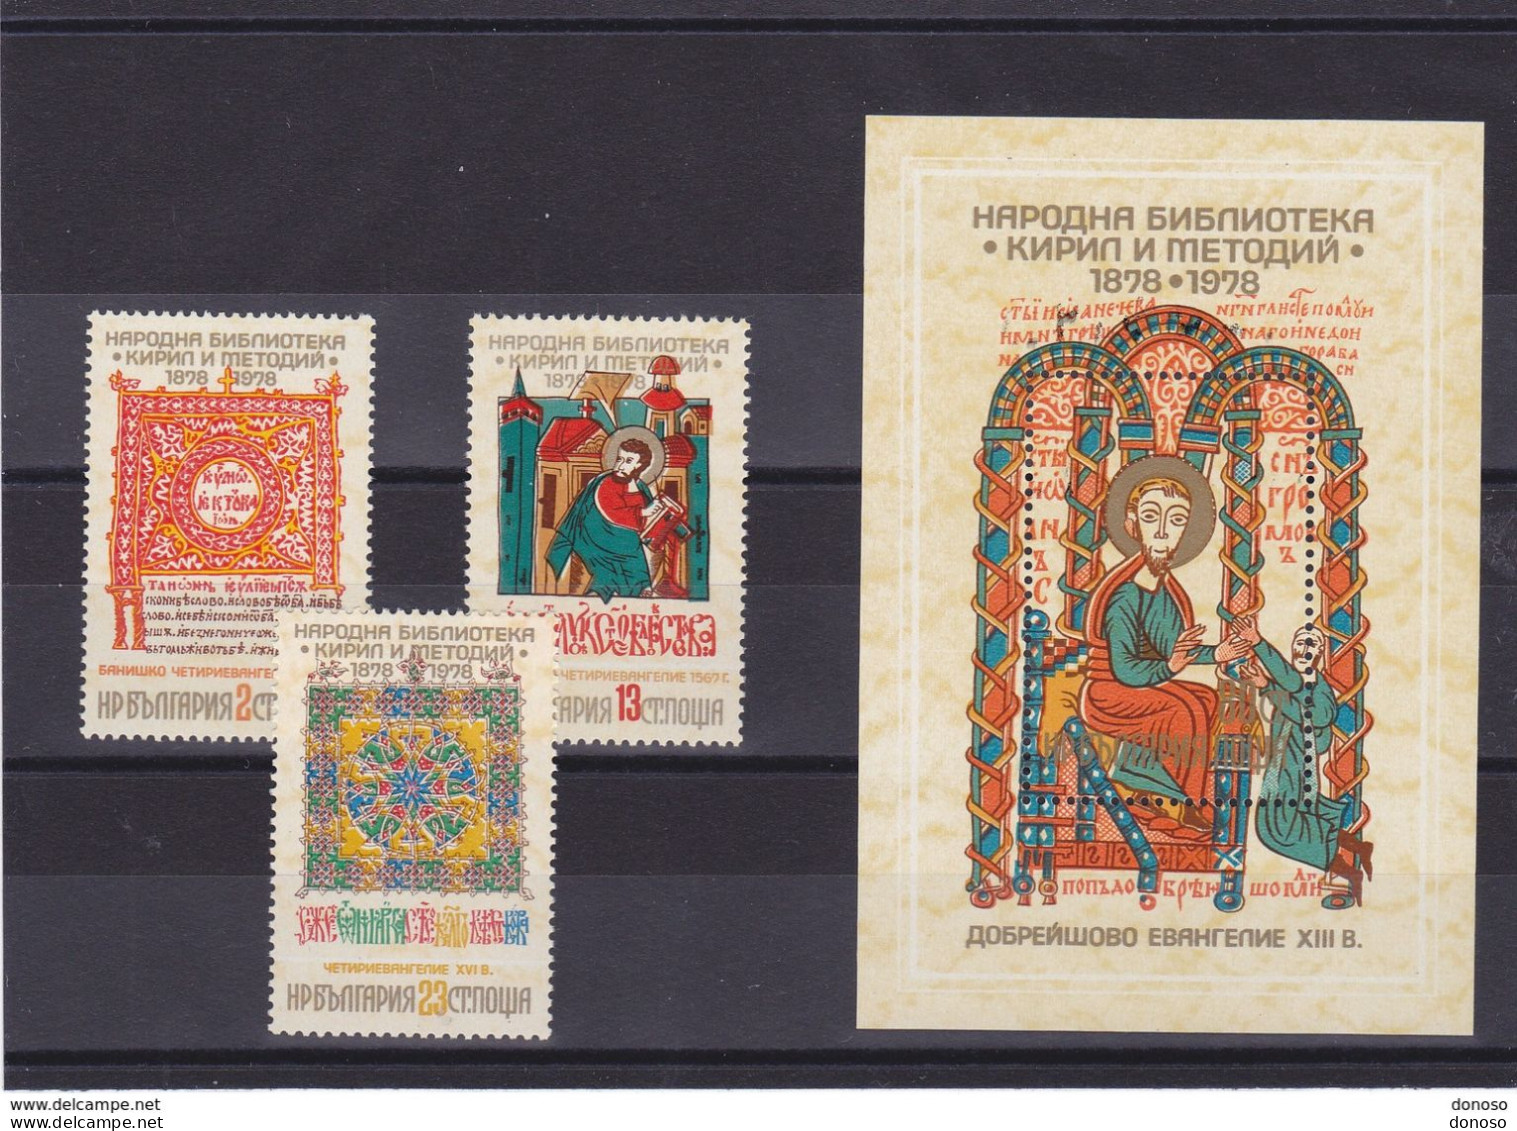 BULGARIE 1978 BIBLIOTHEQUE NATIONALE Yvert 2409-2411 + BF 77, Michel 2731-2733 + Bl 82 NEUF** MNH Cote 4,60 Euros - Neufs